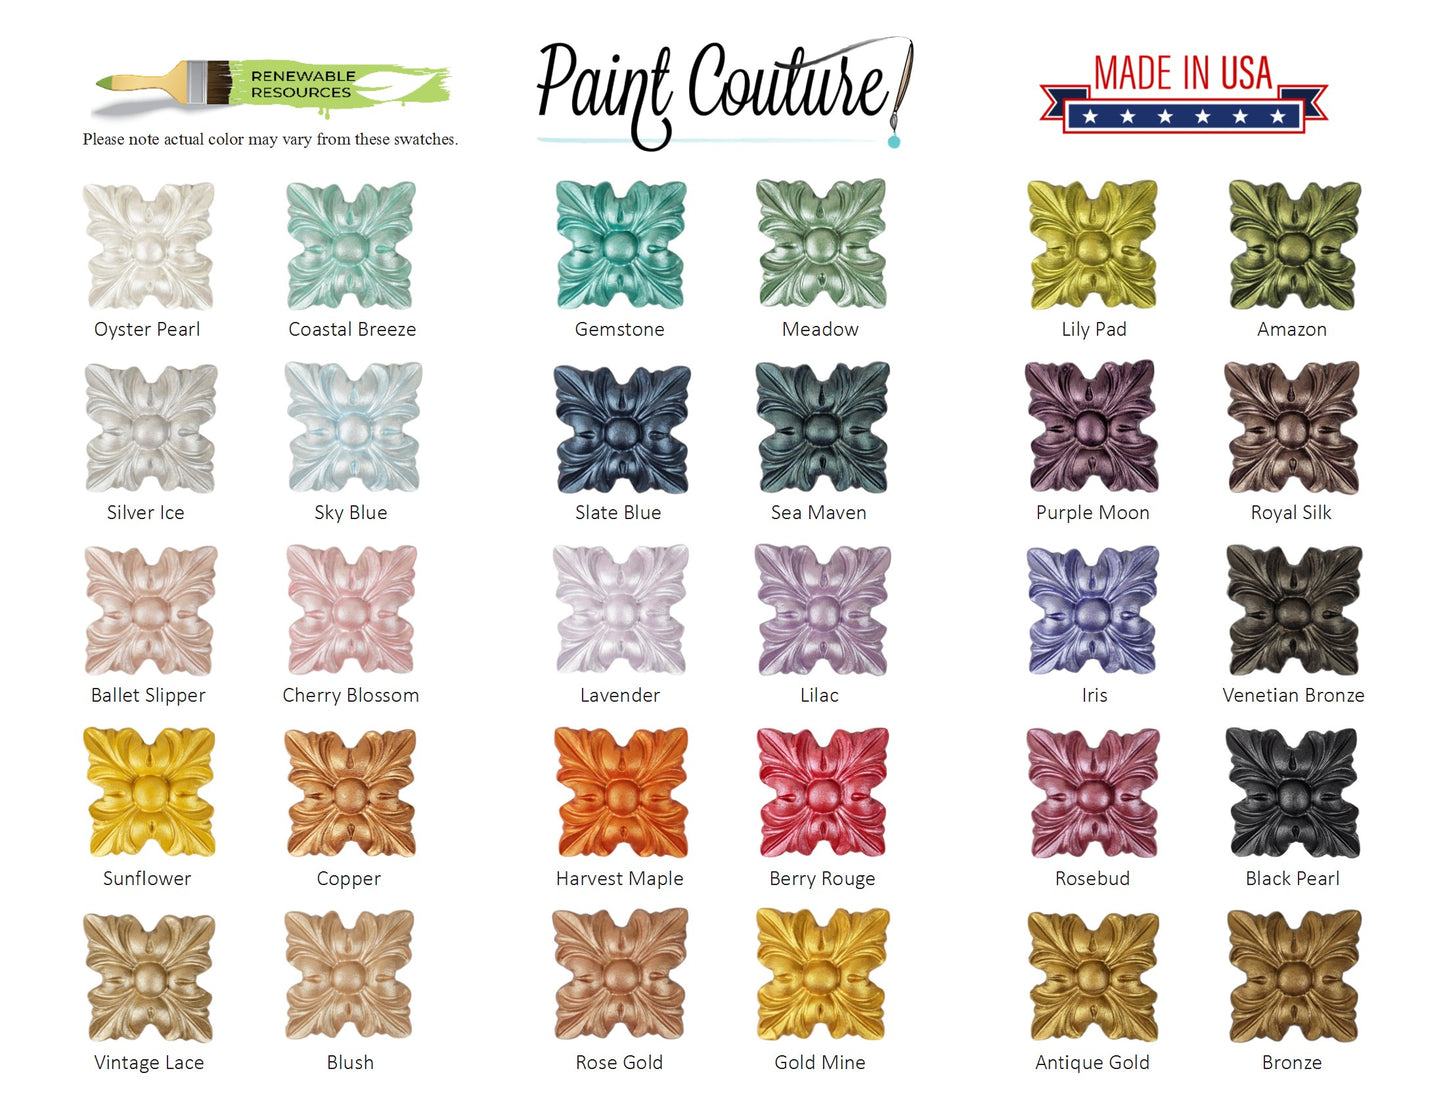 Oyster Pearl Paint Couture Lux Metallic Paint